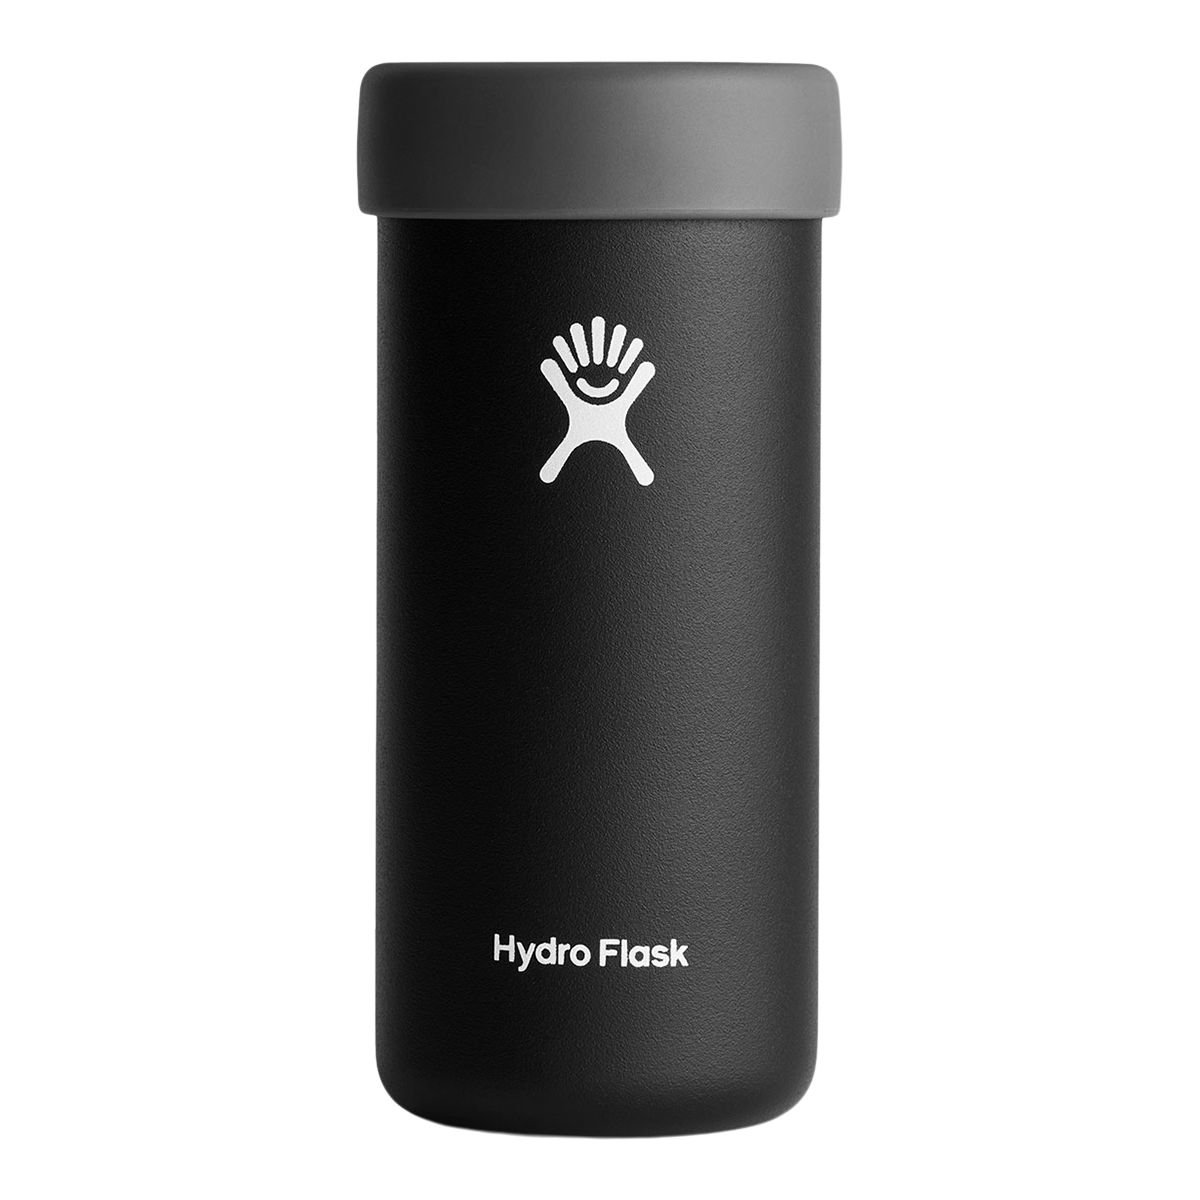 Hydroflask Slim Cooler Cup 12 oz Can Sleeve/Koozie or Cup  Insulated Stainless Steel